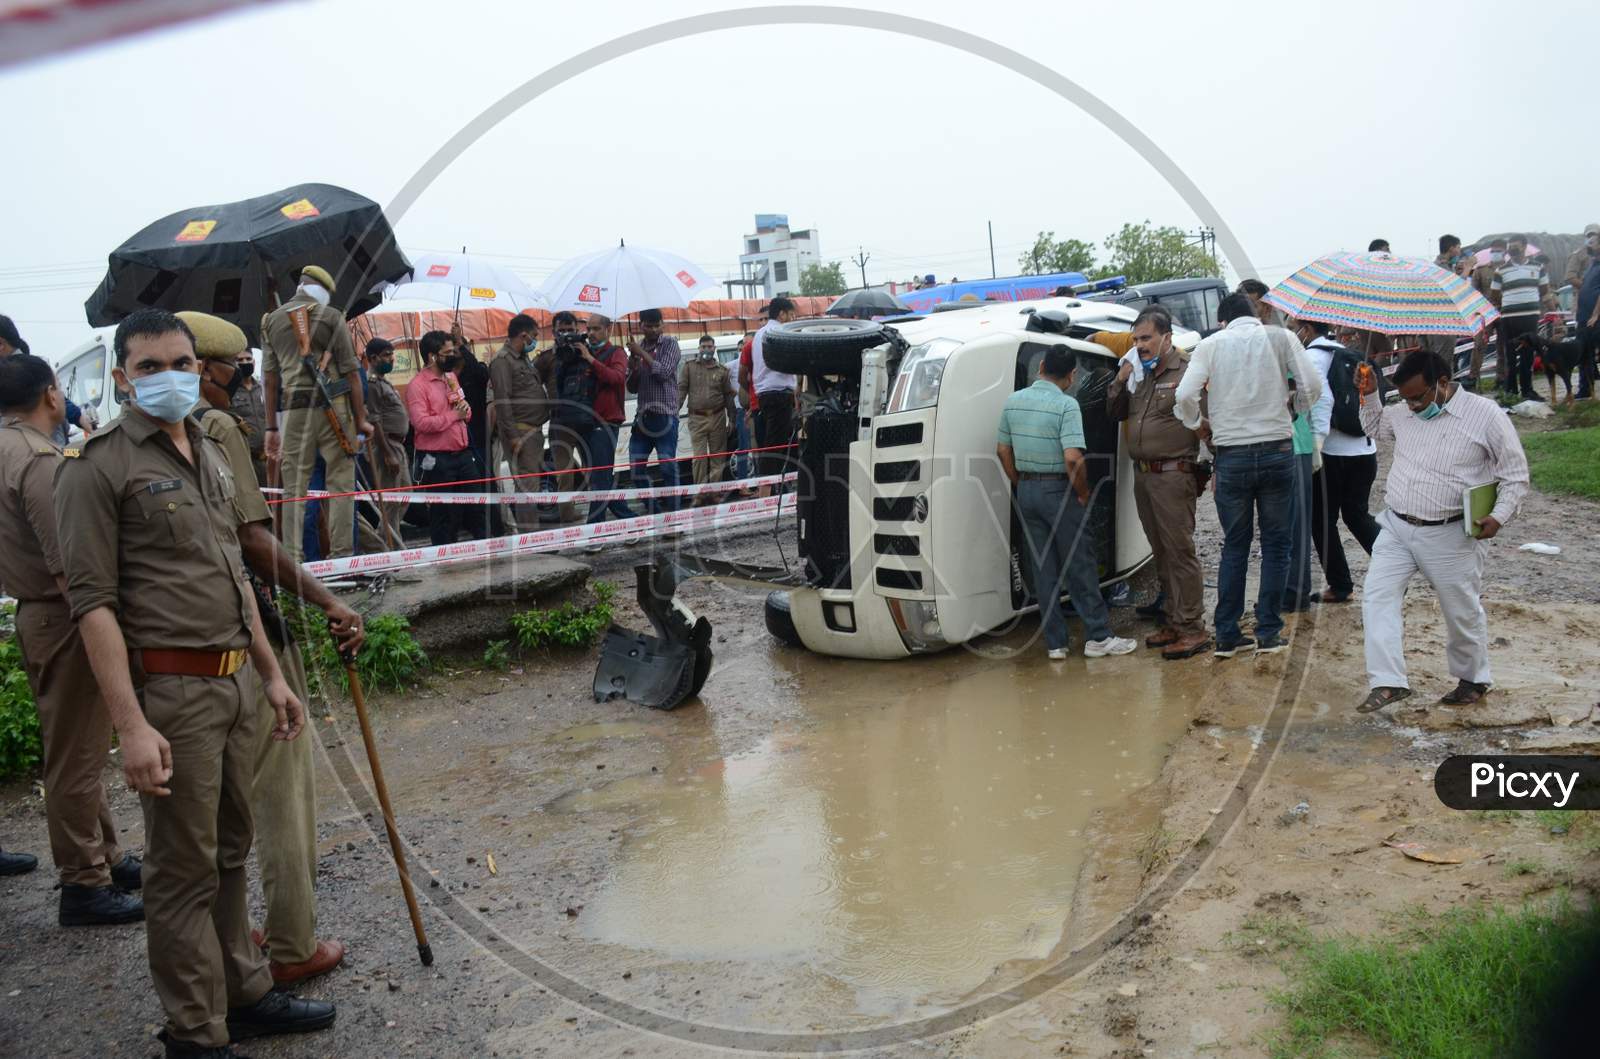 Police Officials Seal The Site Of Encounter Where Gangster Vikas Dubey Was Killed When He Tried To Escape From Police Custody In Kanpur, Uttar Pradesh On July 10, 2020